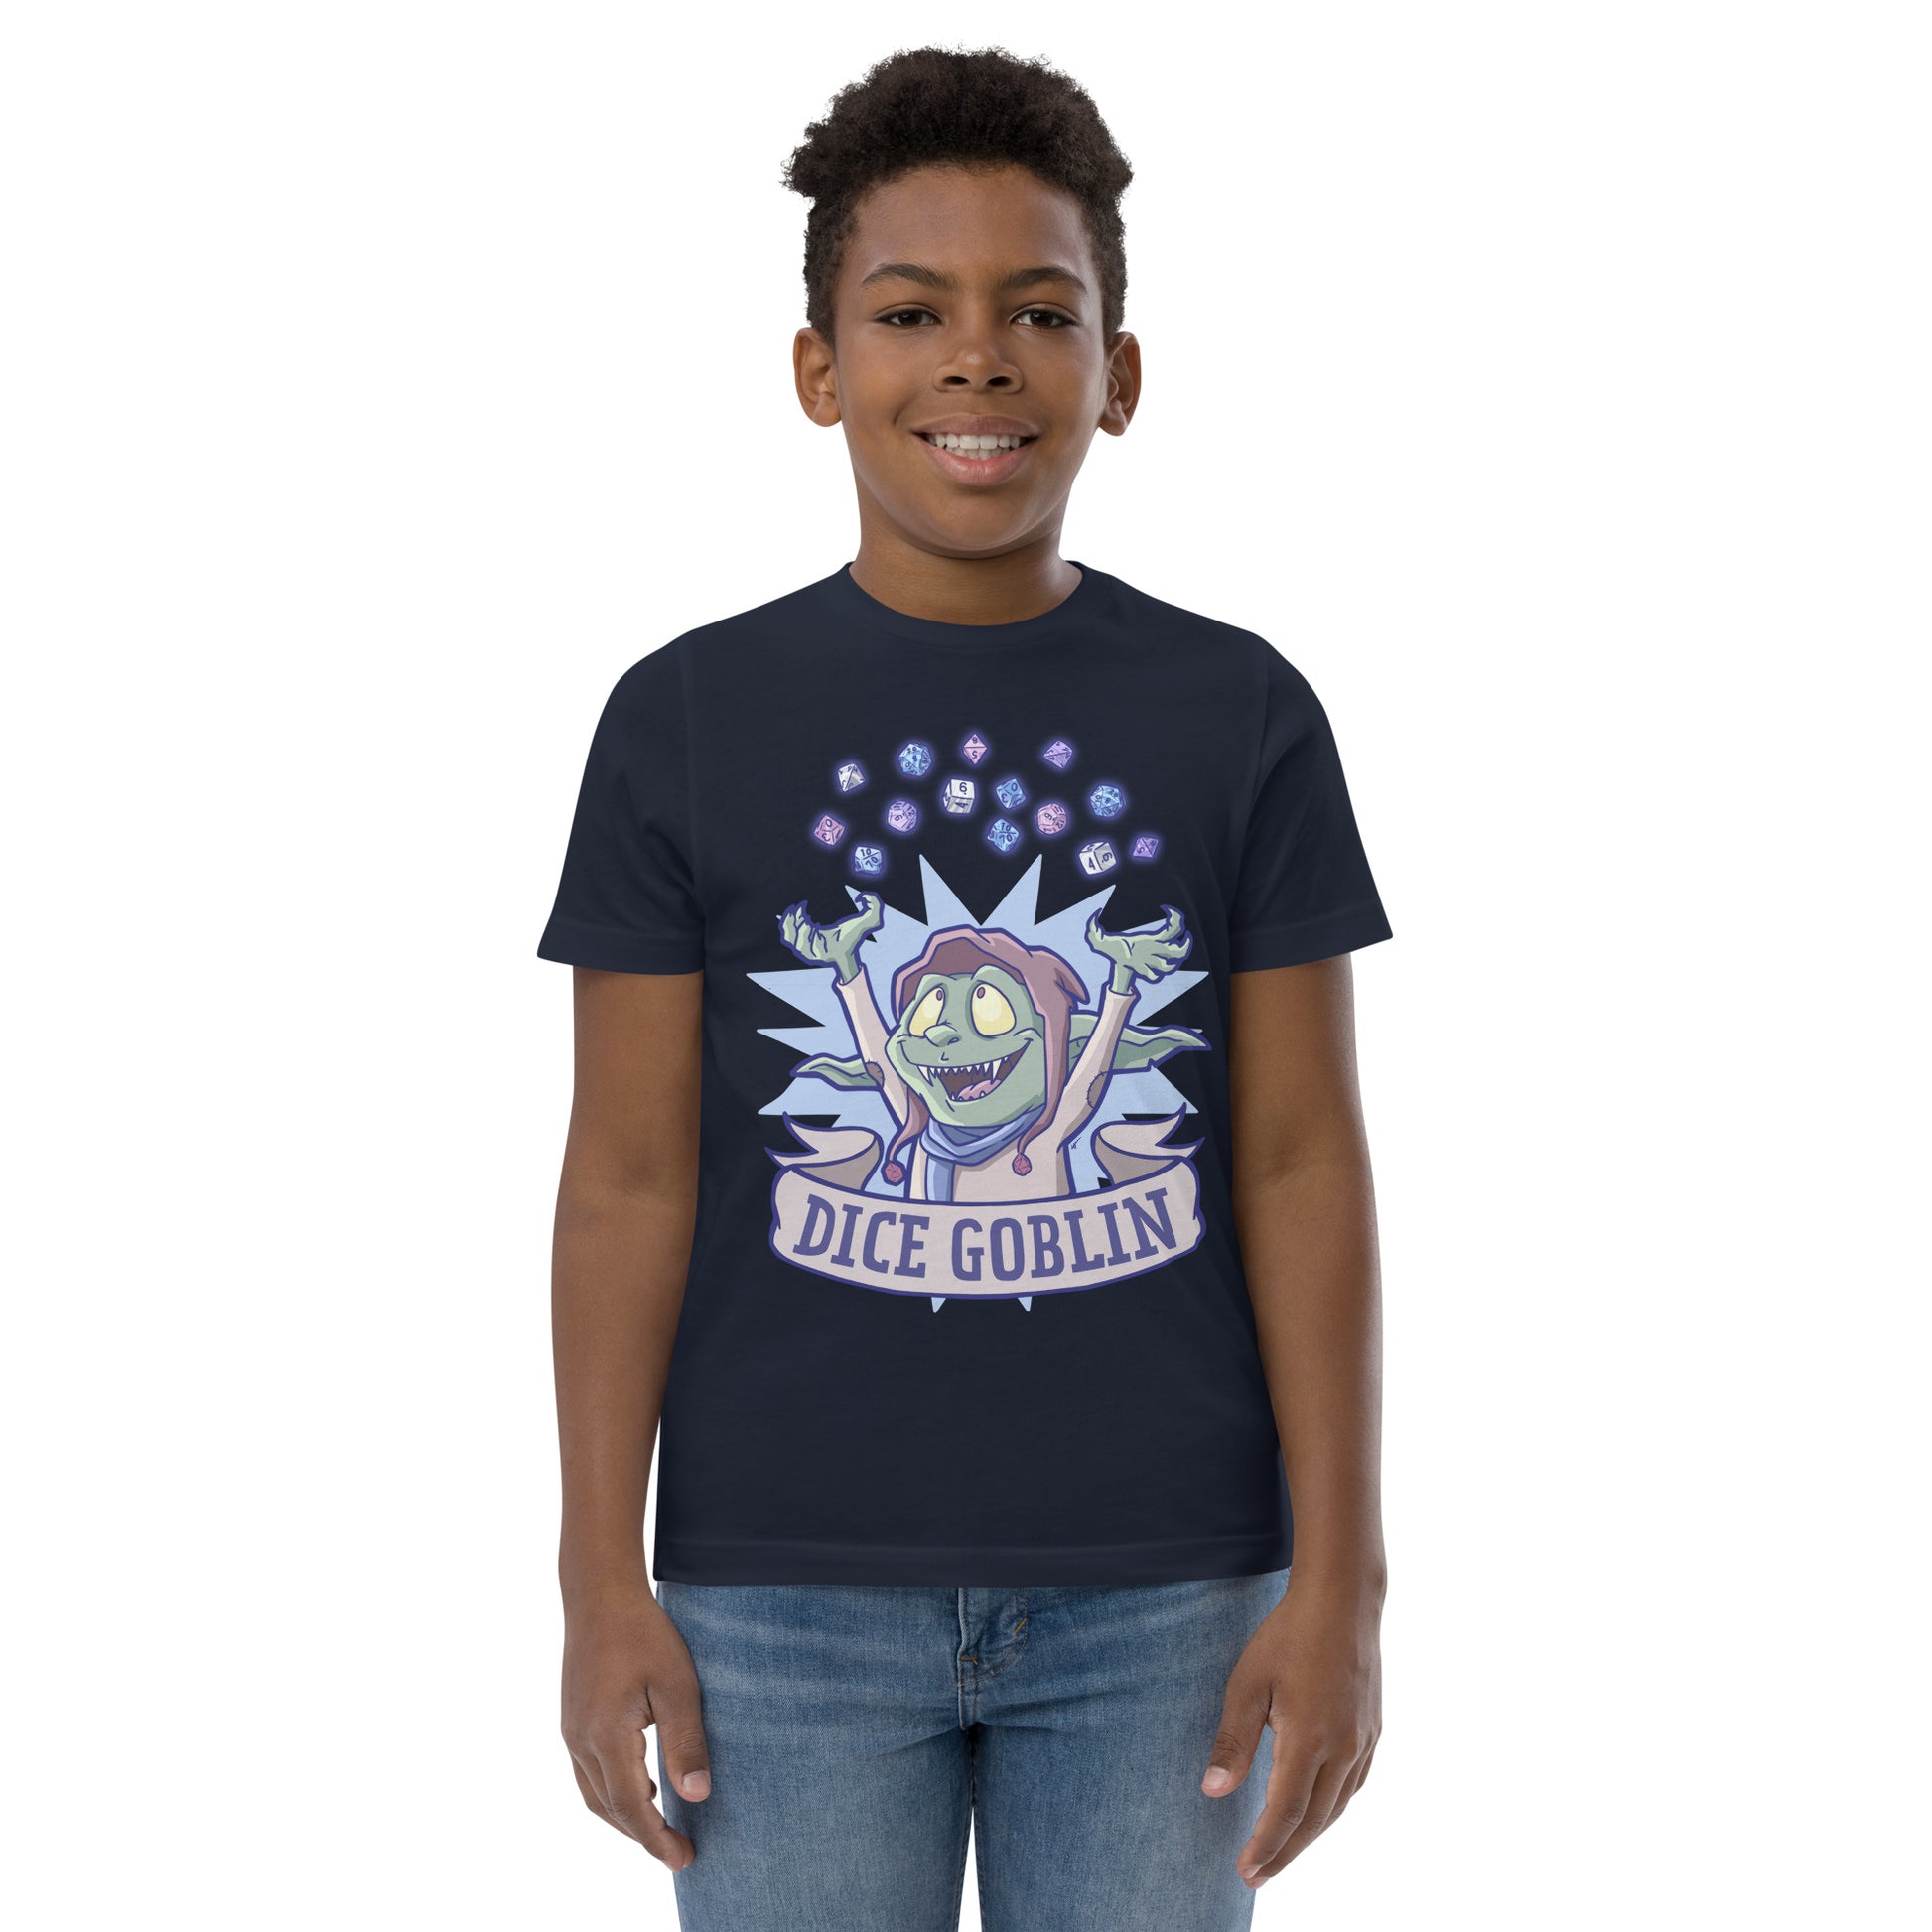 Dice Goblin Youth t-shirt  Level 1 Gamers Navy XS 